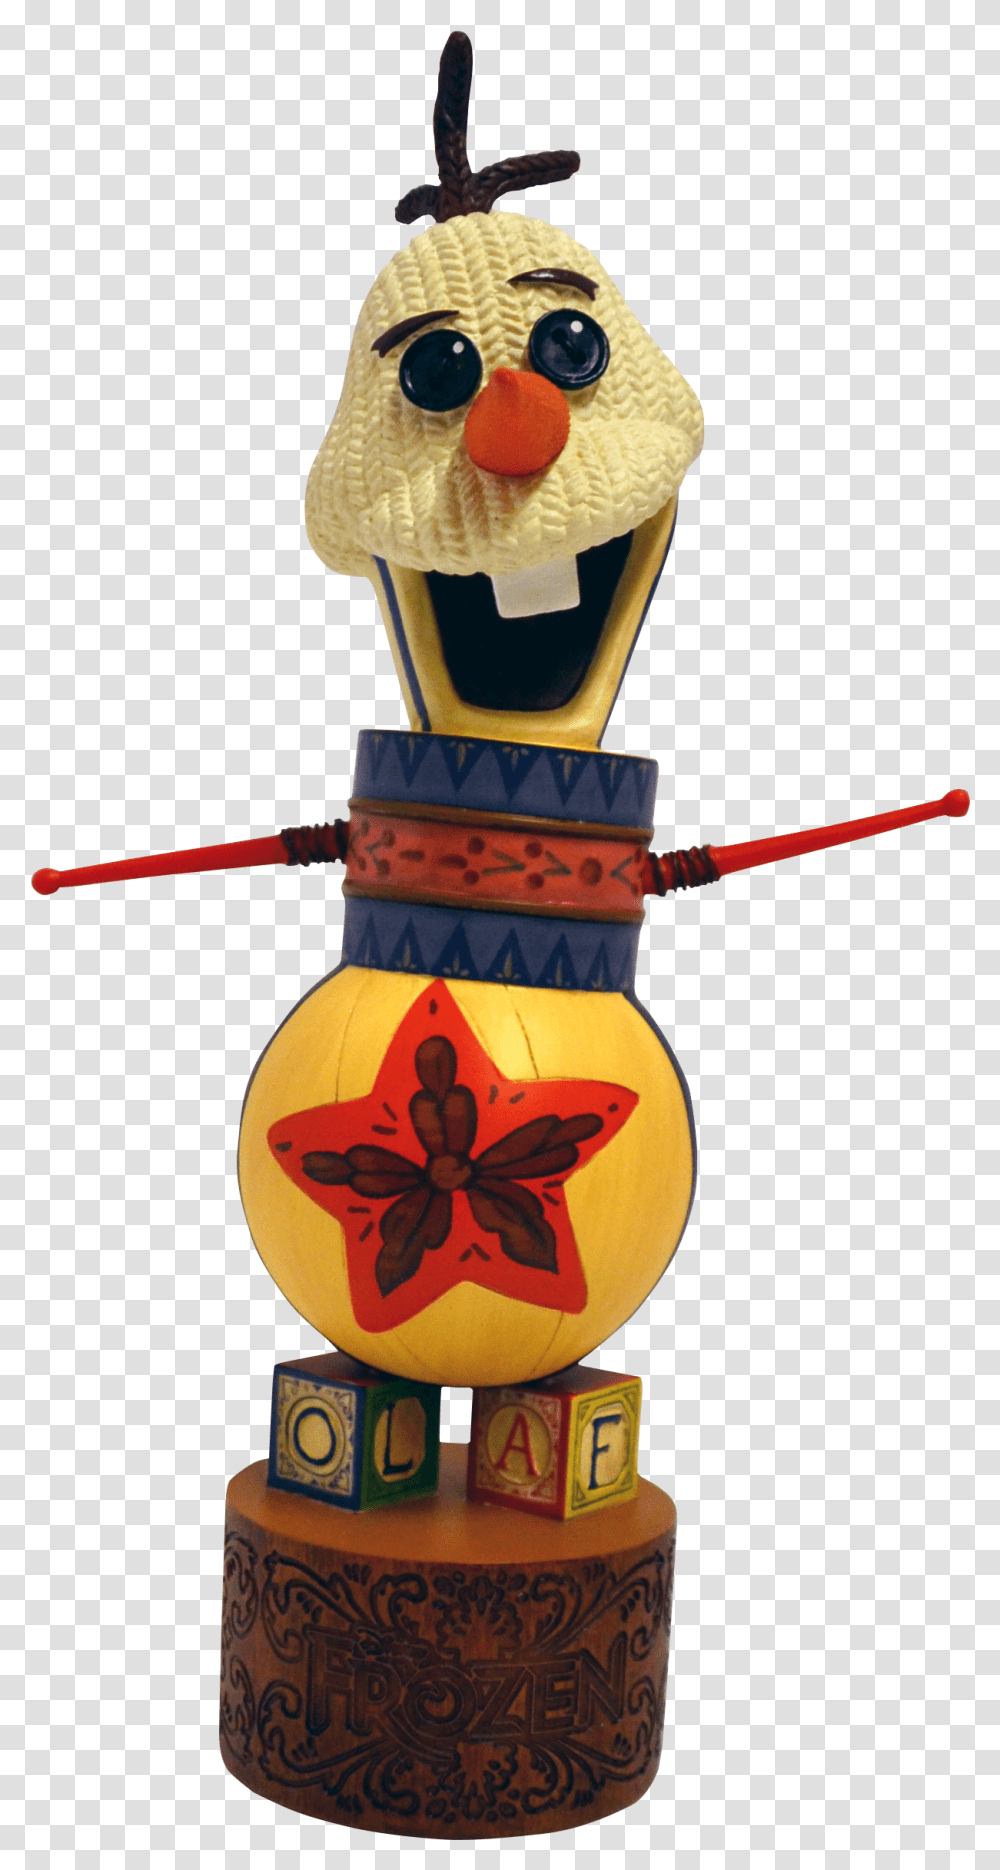 Frozen The Broadway Musical Olaf Statue, Toy, Plant, Food, Produce Transparent Png